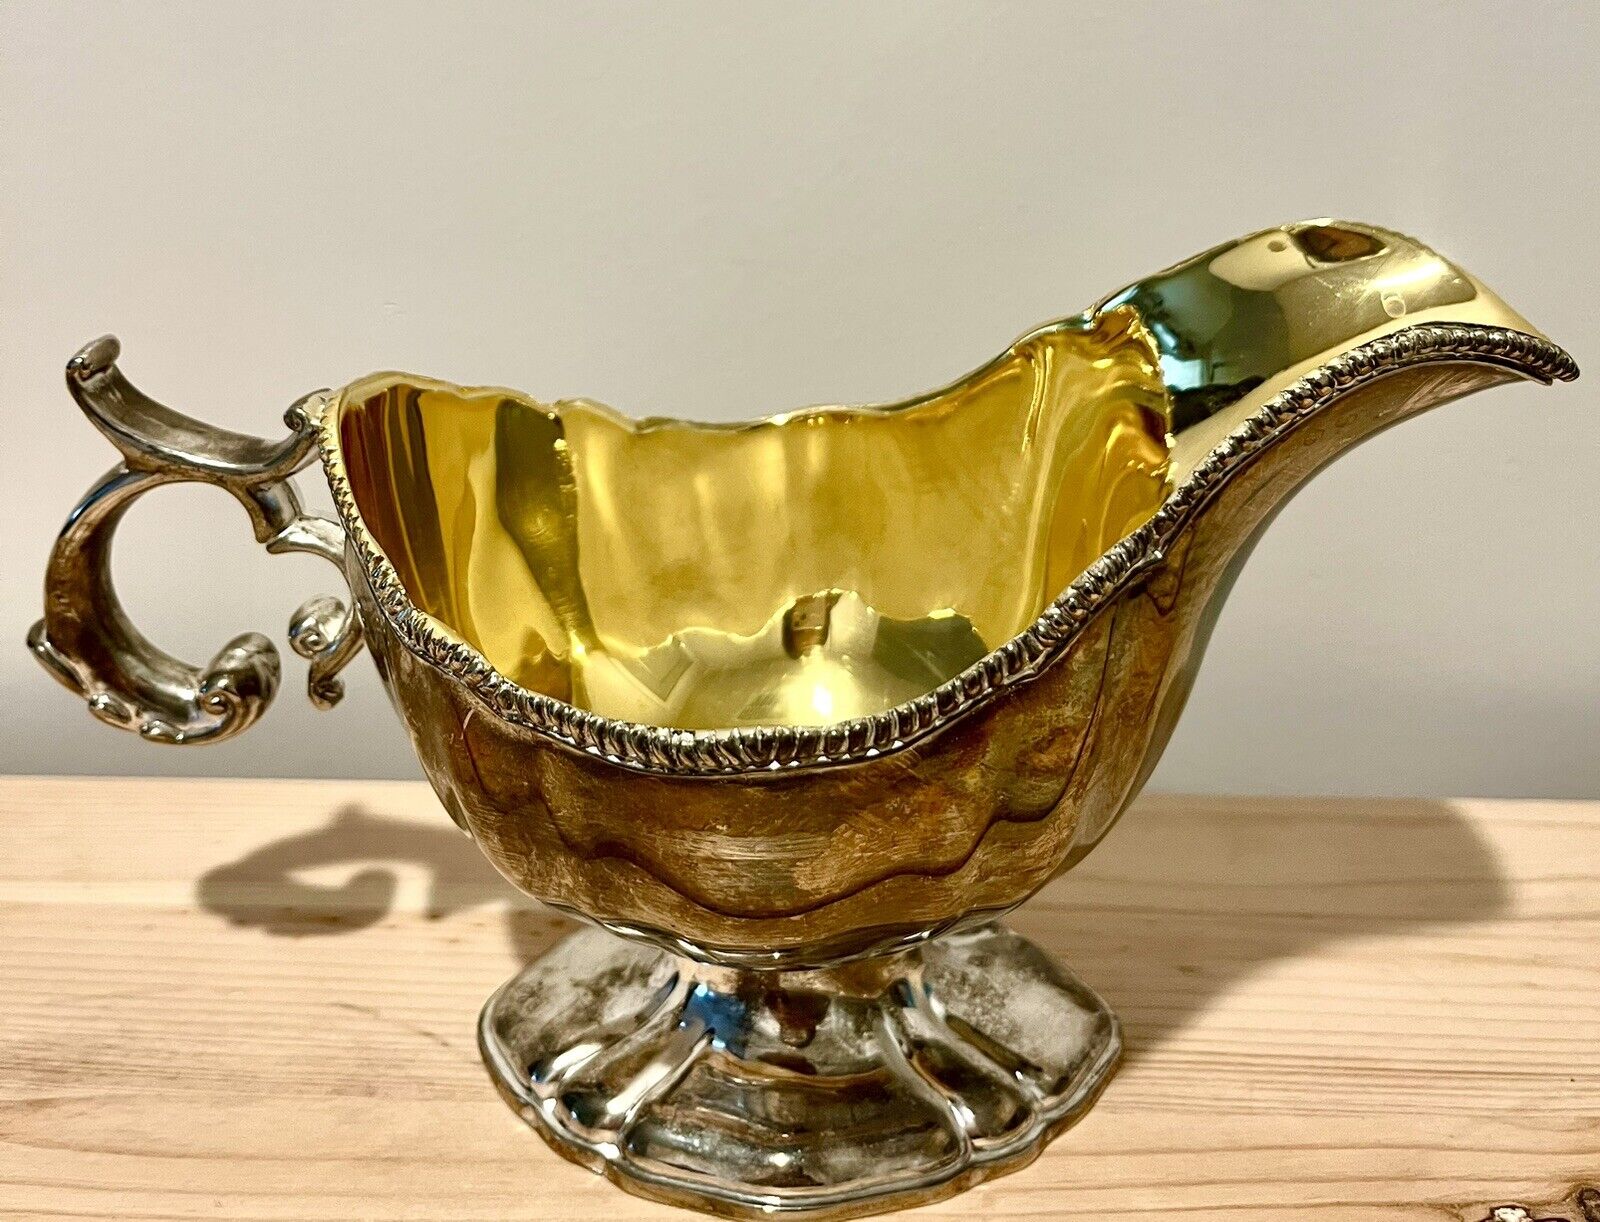 Vintage Silver Plated Gravy Boat Bowl